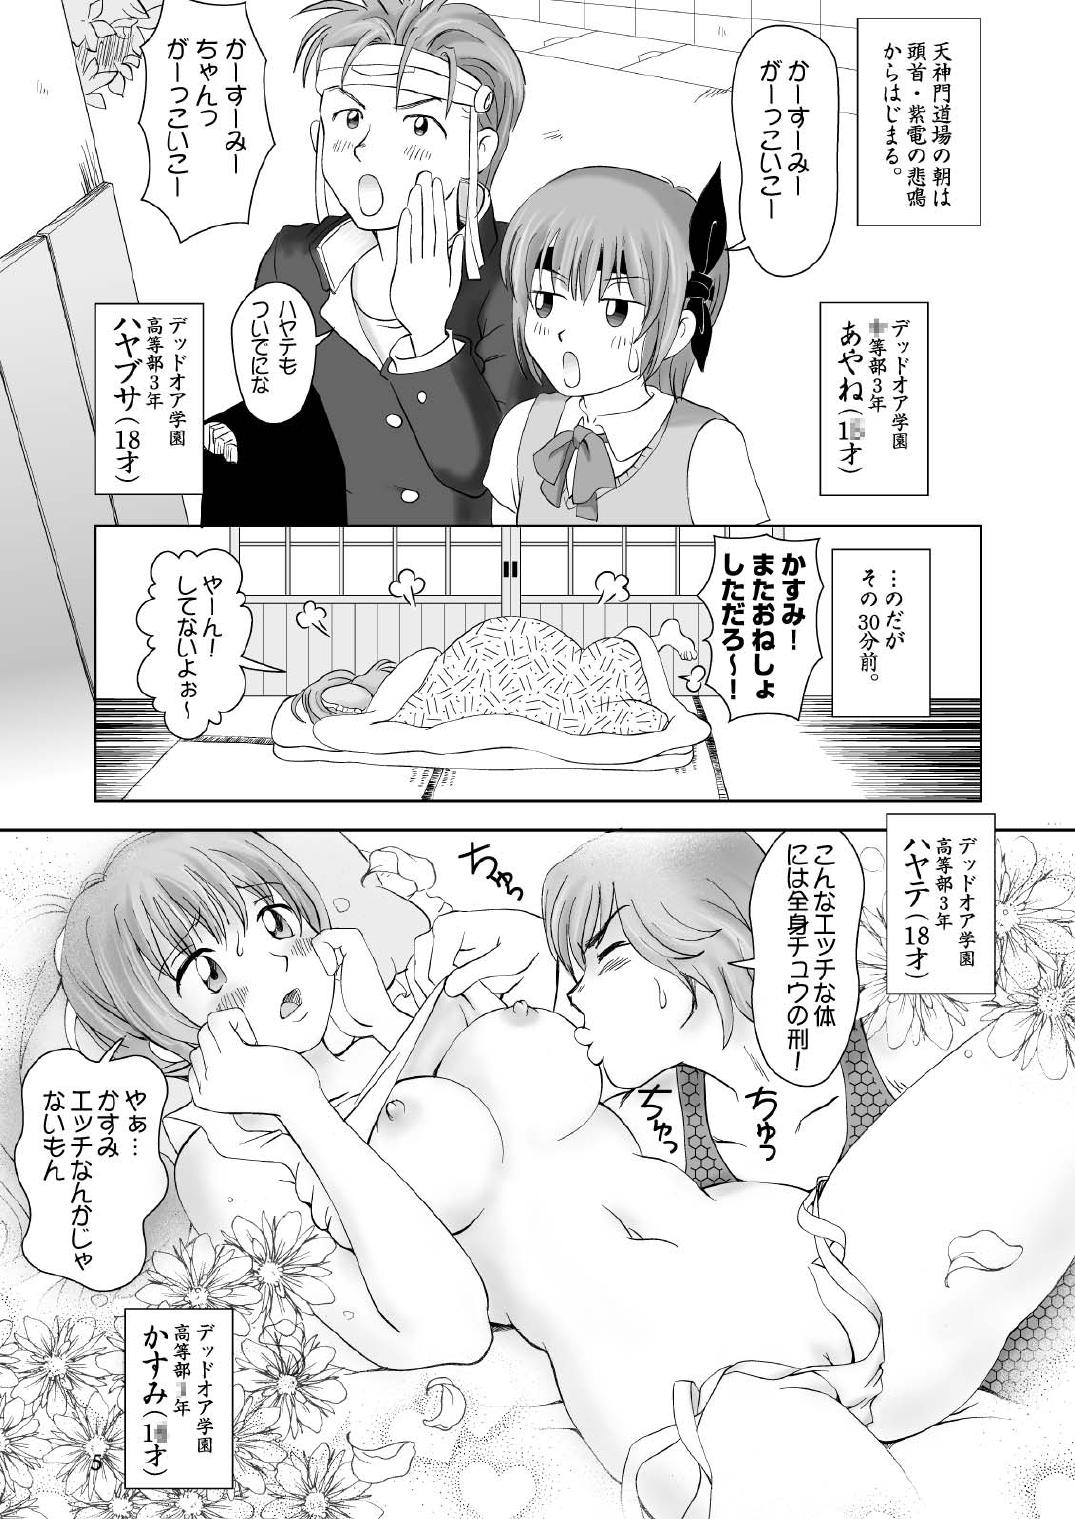 Mask Sugoiyo!! Kasumi-chan 2 - Dead or alive Free Amateur - Page 5